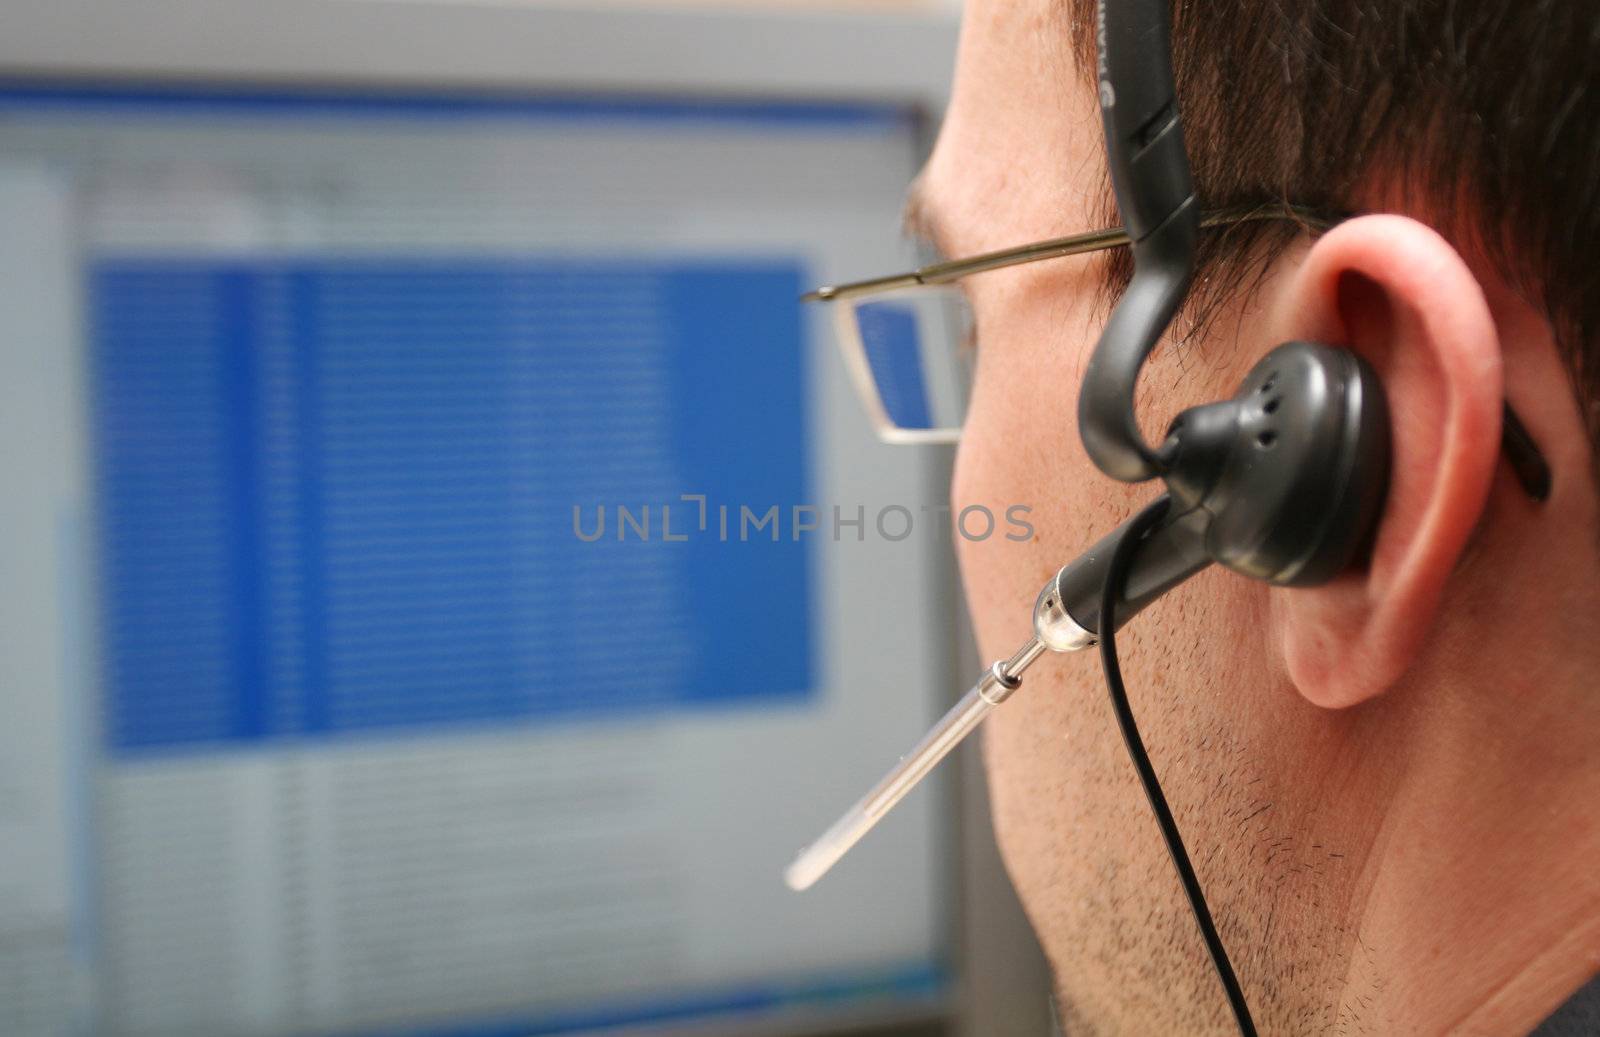 A male analyst working at a computer, with a headset, shot from behind focus on headset